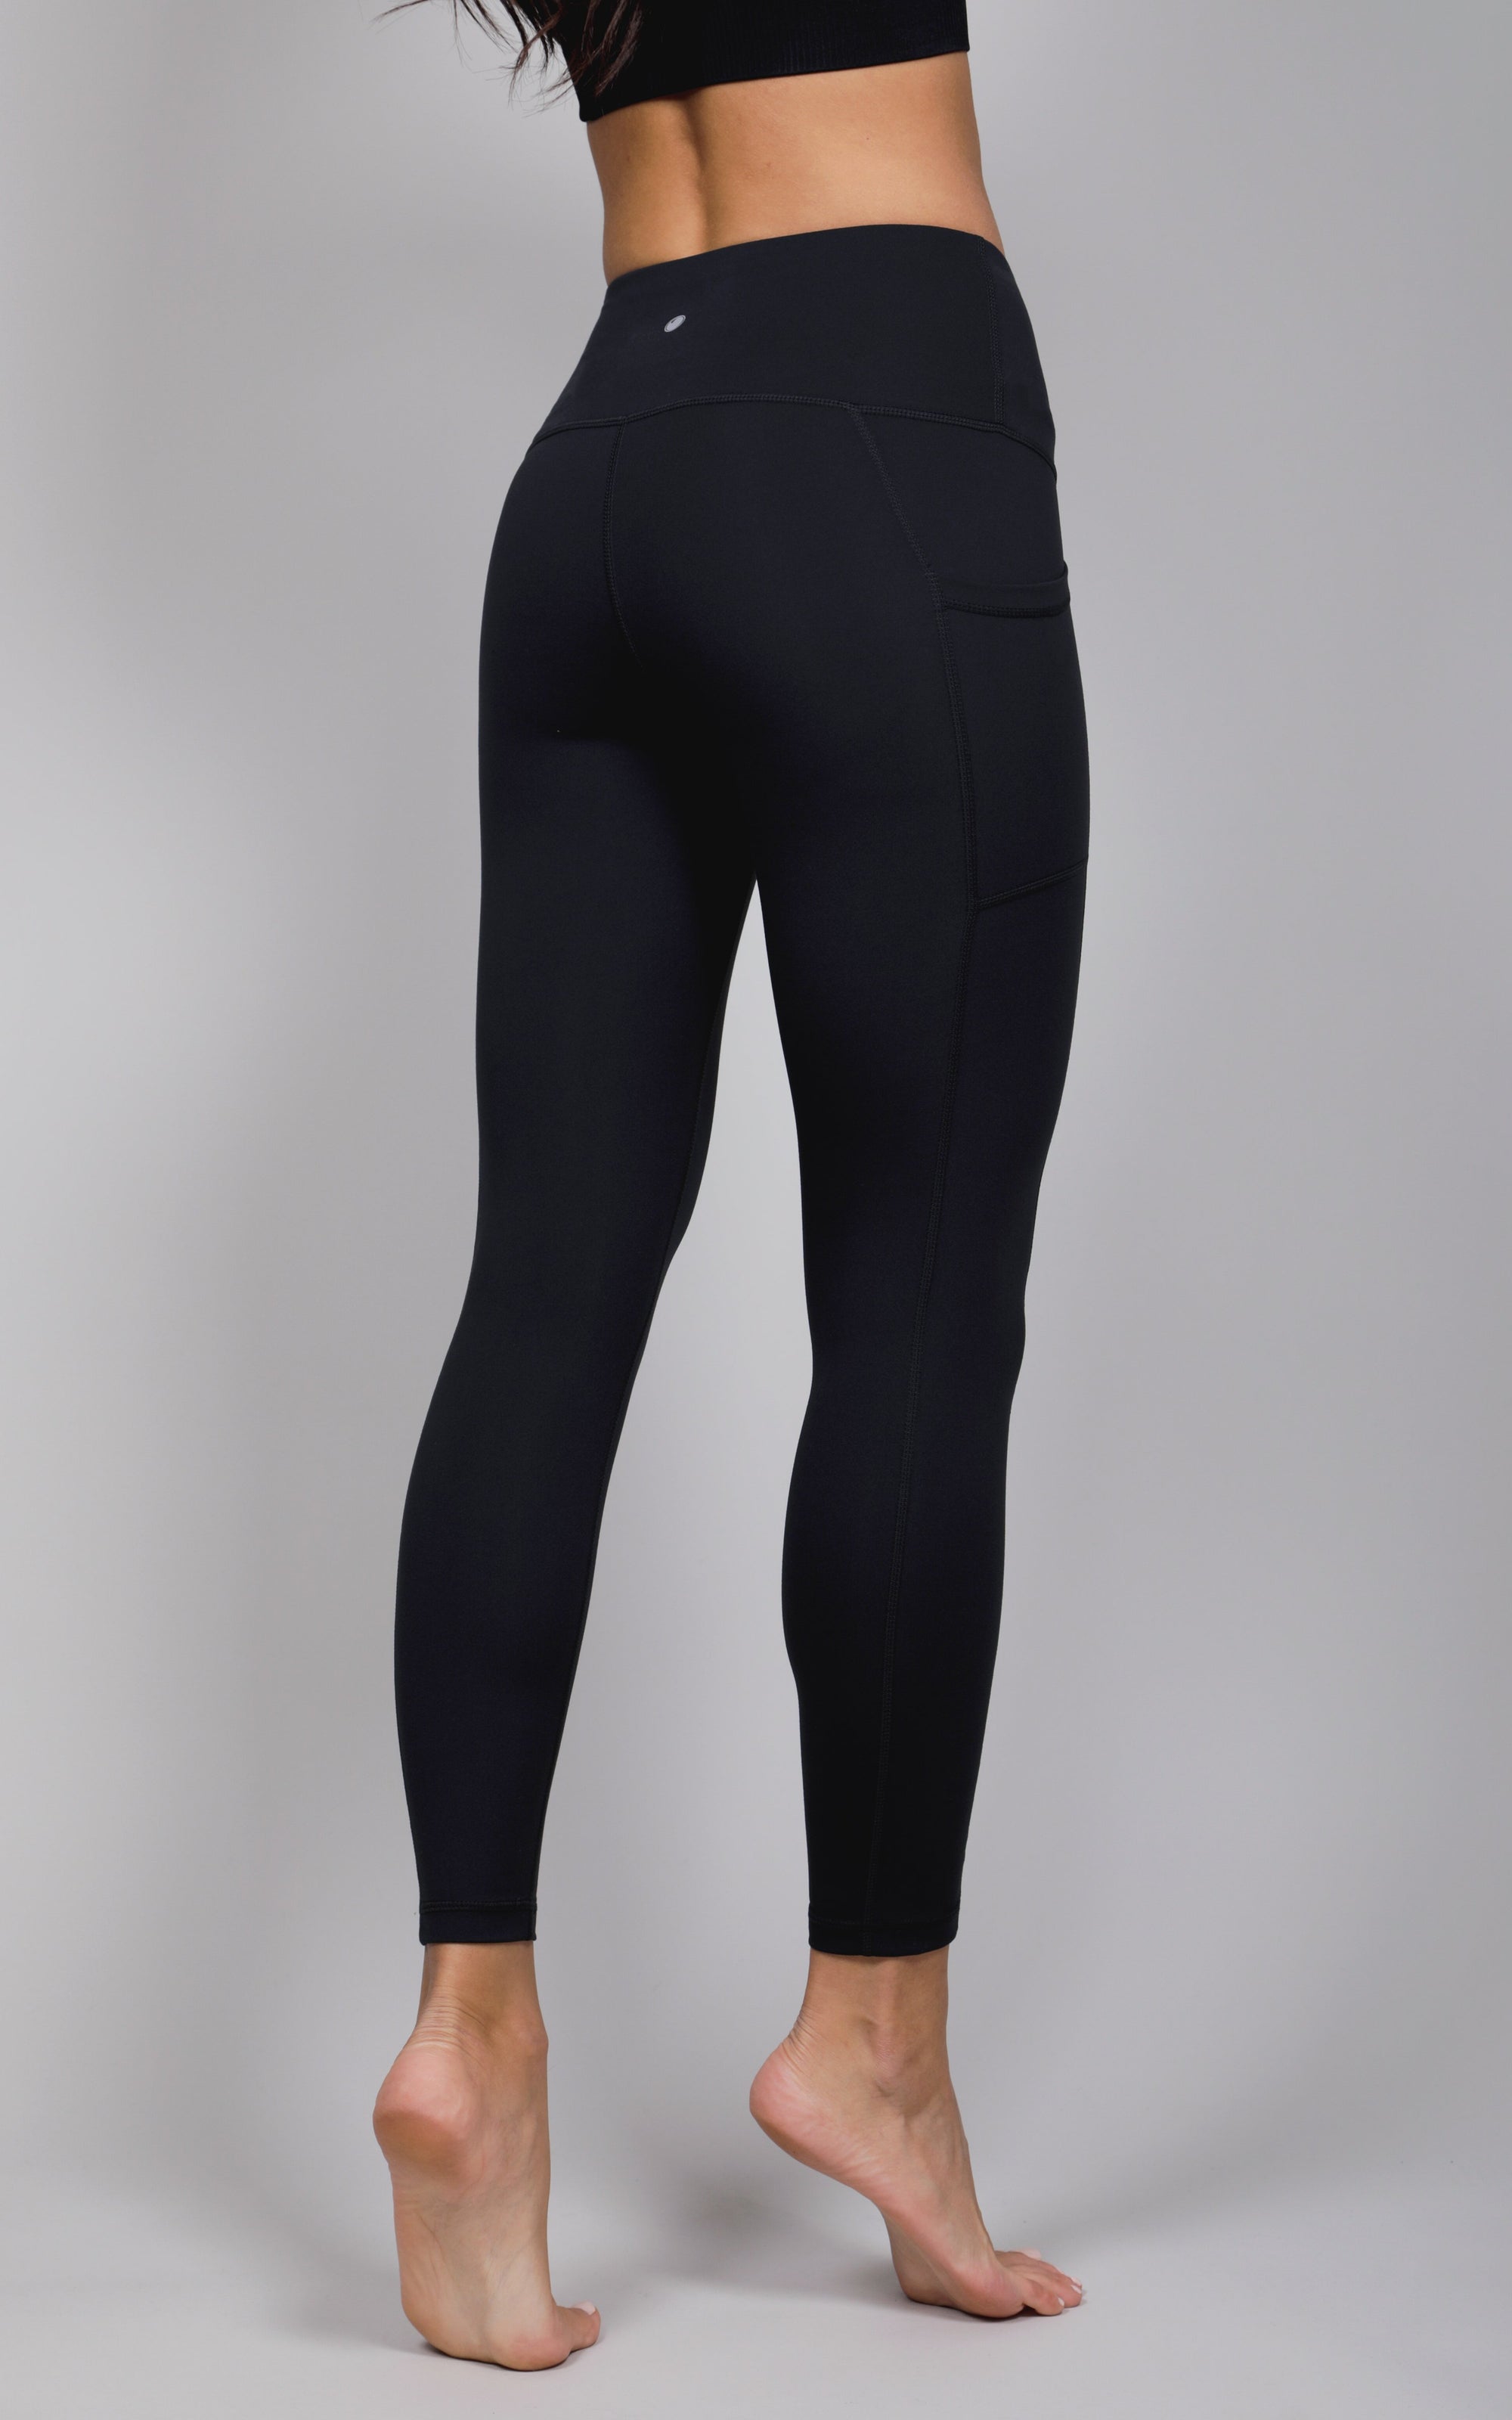 Yogalicious Lux High Waist Side Pocket Ankle Legging - Lily Pad Lux - Small  at  Women's Clothing store